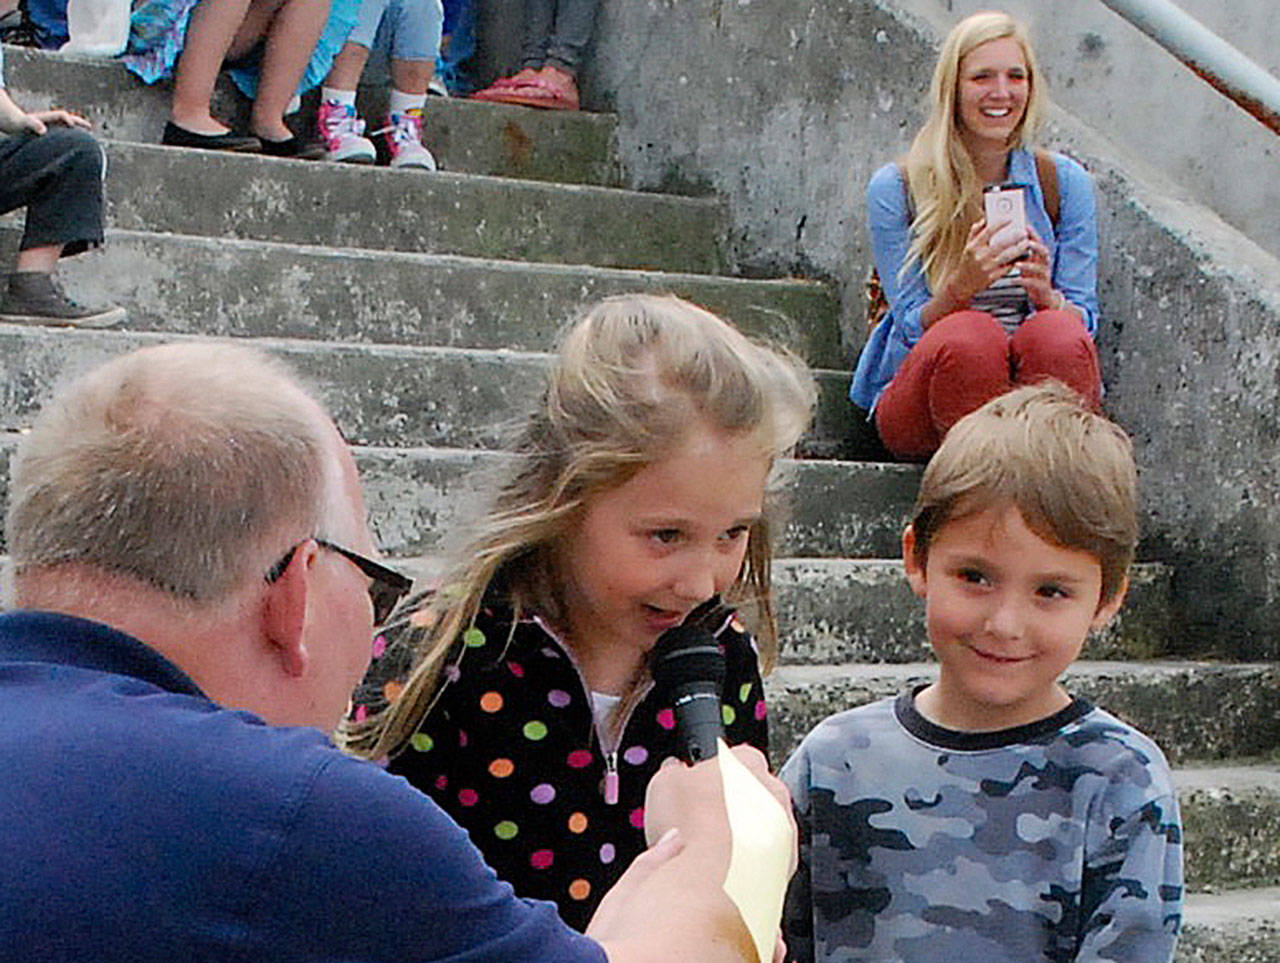 &lt;strong&gt;Calling all seagulls (June 1, 2018)&lt;/strong&gt;                                The Fathoms O’ Fun’s Seagull Calling Contest is always a fun event and a great chance to capture images of the most willing of contestants — kids. In this photo, Ava Keiser gave onlookers at the waterfront her best vocal performance while brother Chieftain (and mom in the background) looks on.